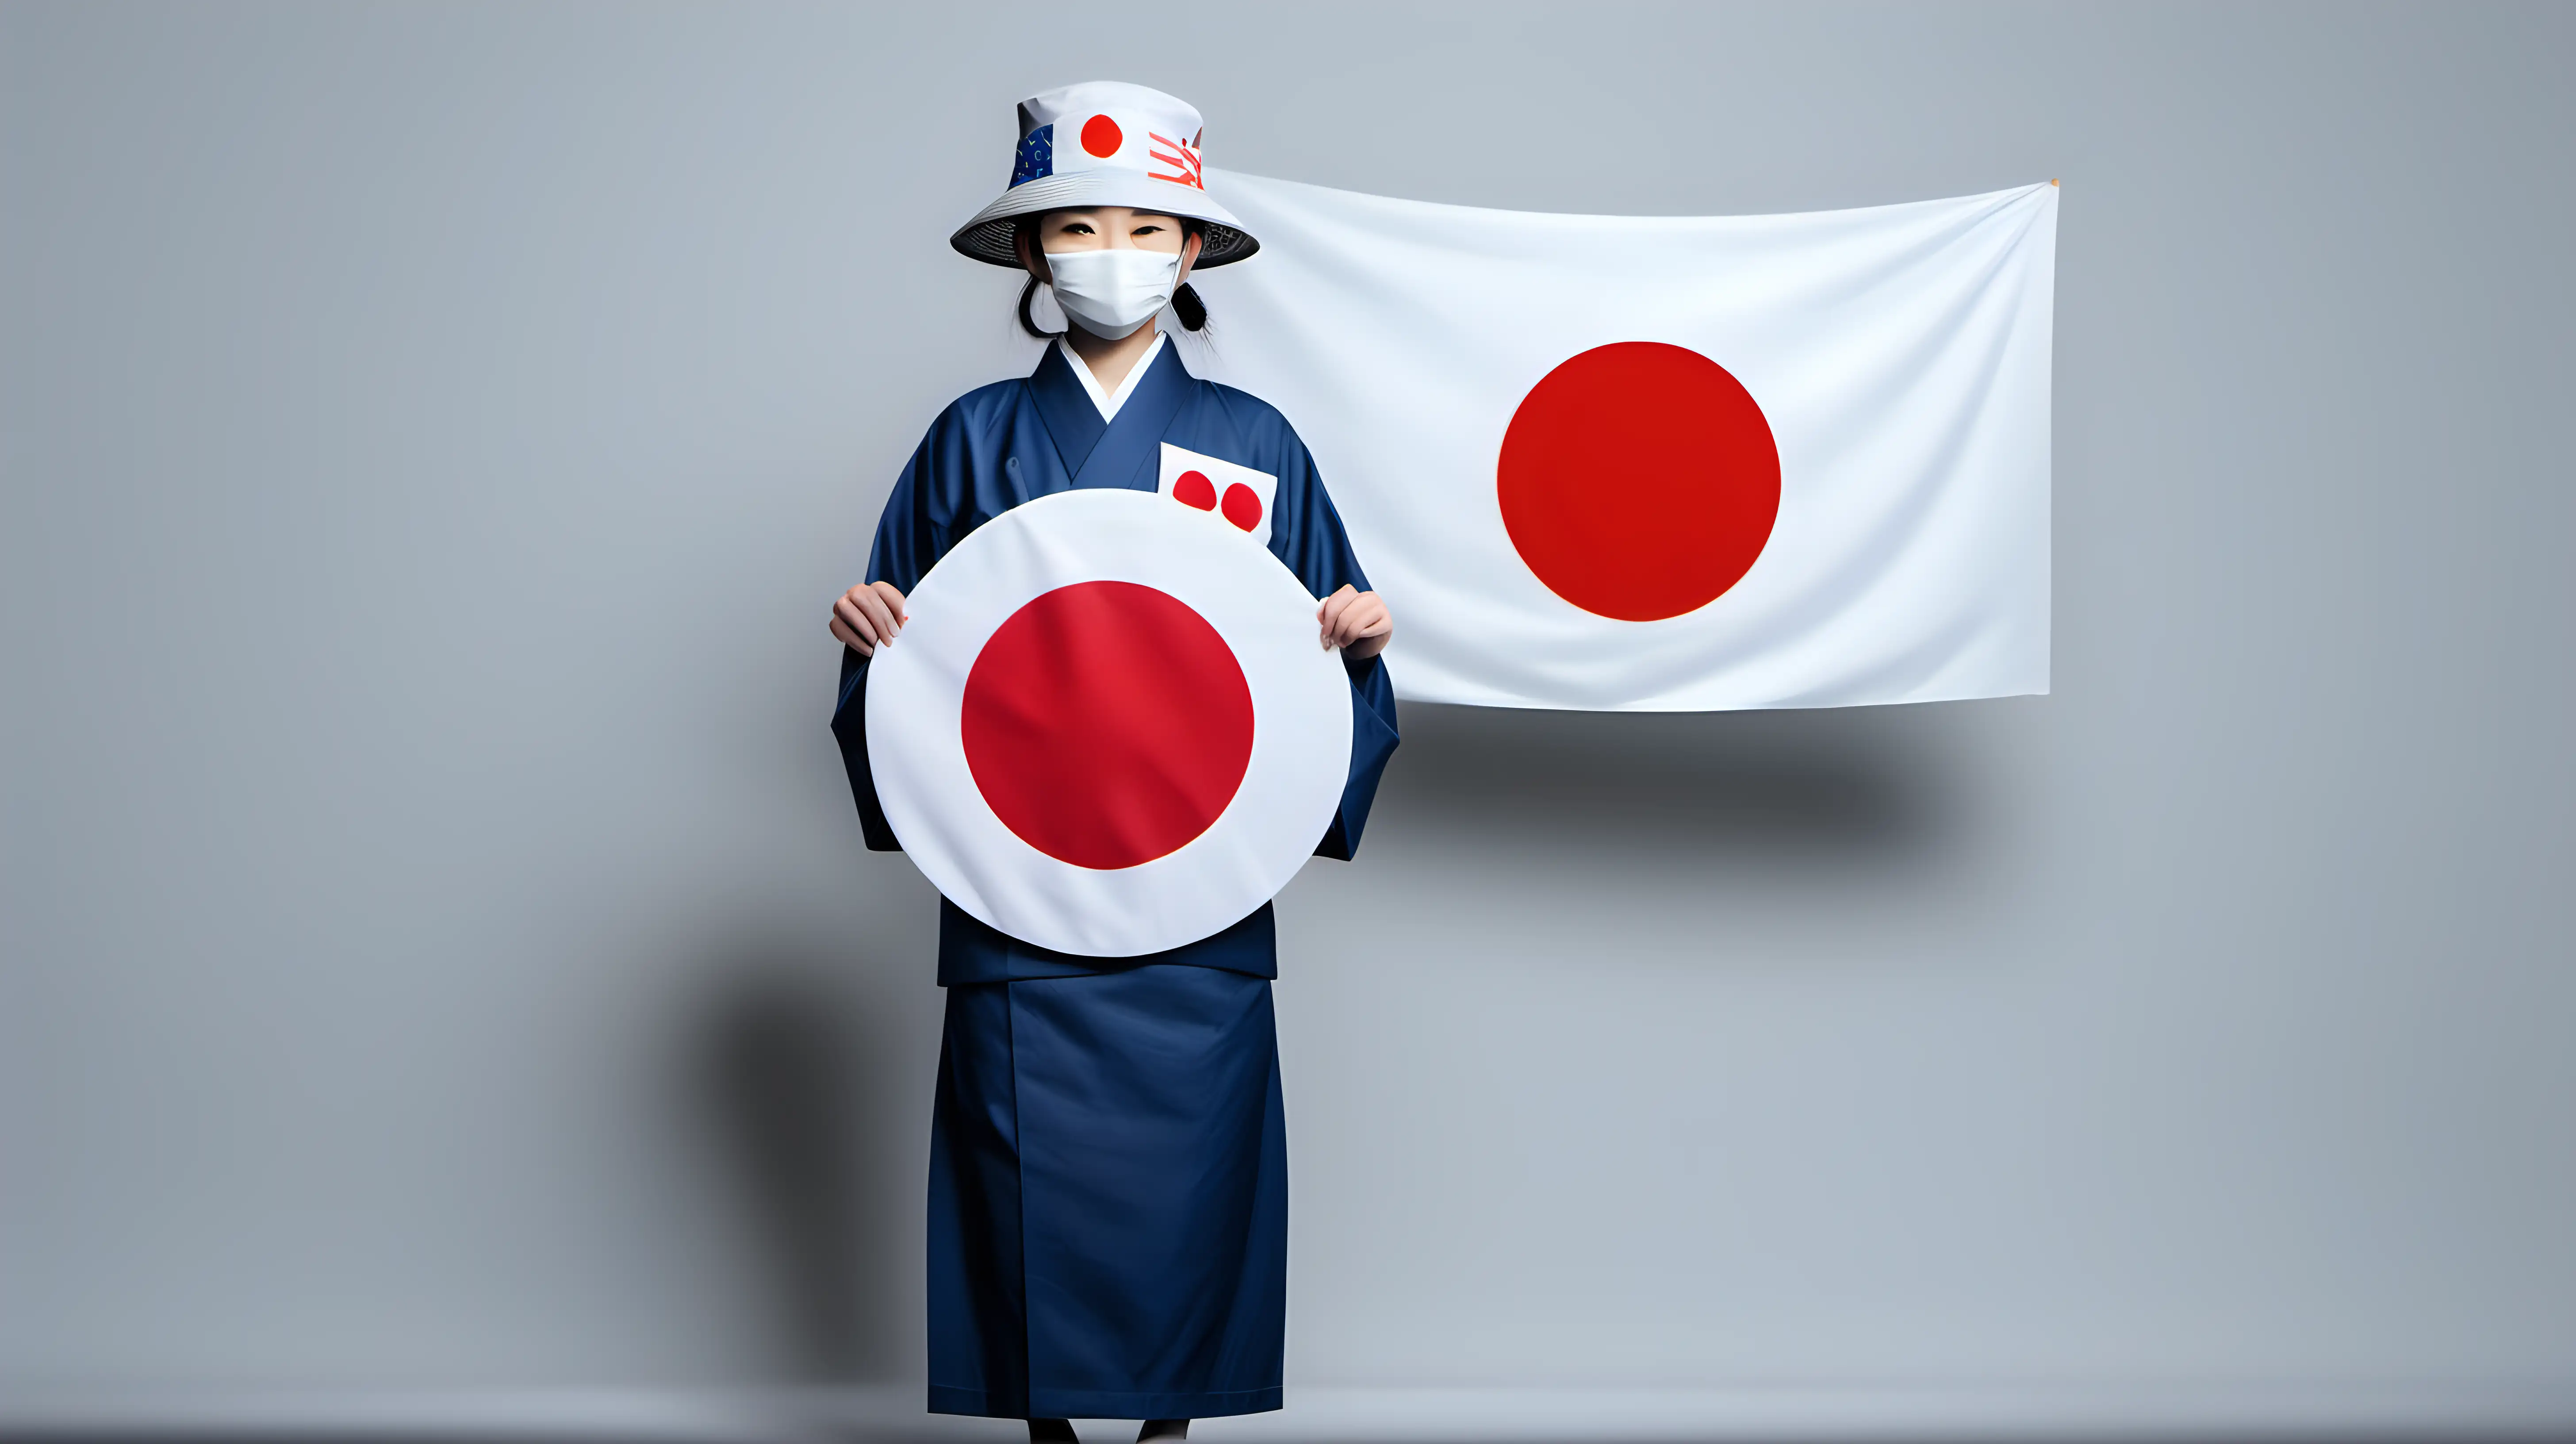 Patriotic Individual Adorned with Symbols Embracing the Japanese Flag